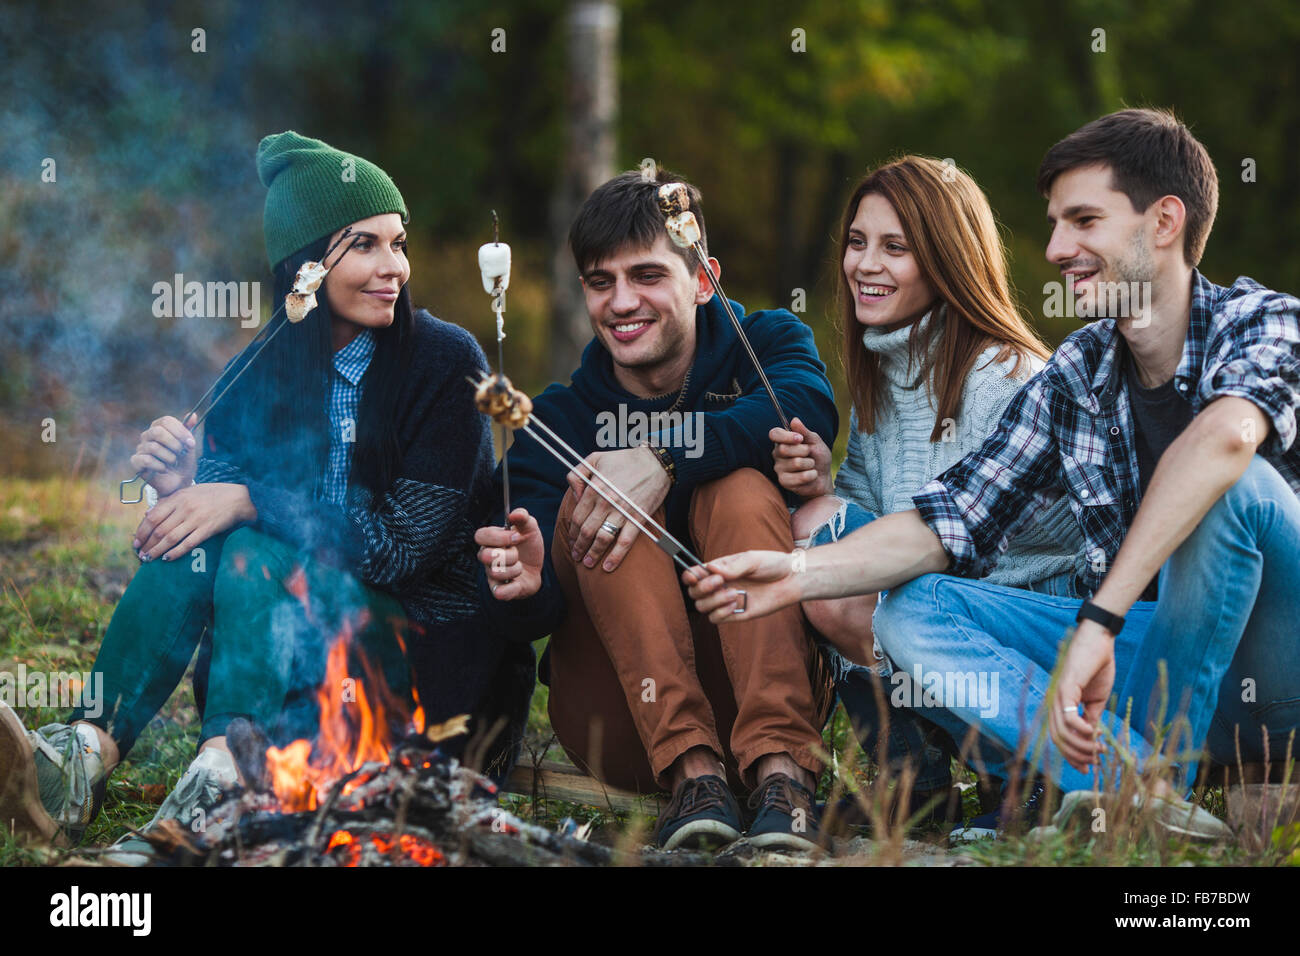 Smiling friends roasting marshmallows in forest Stock Photo